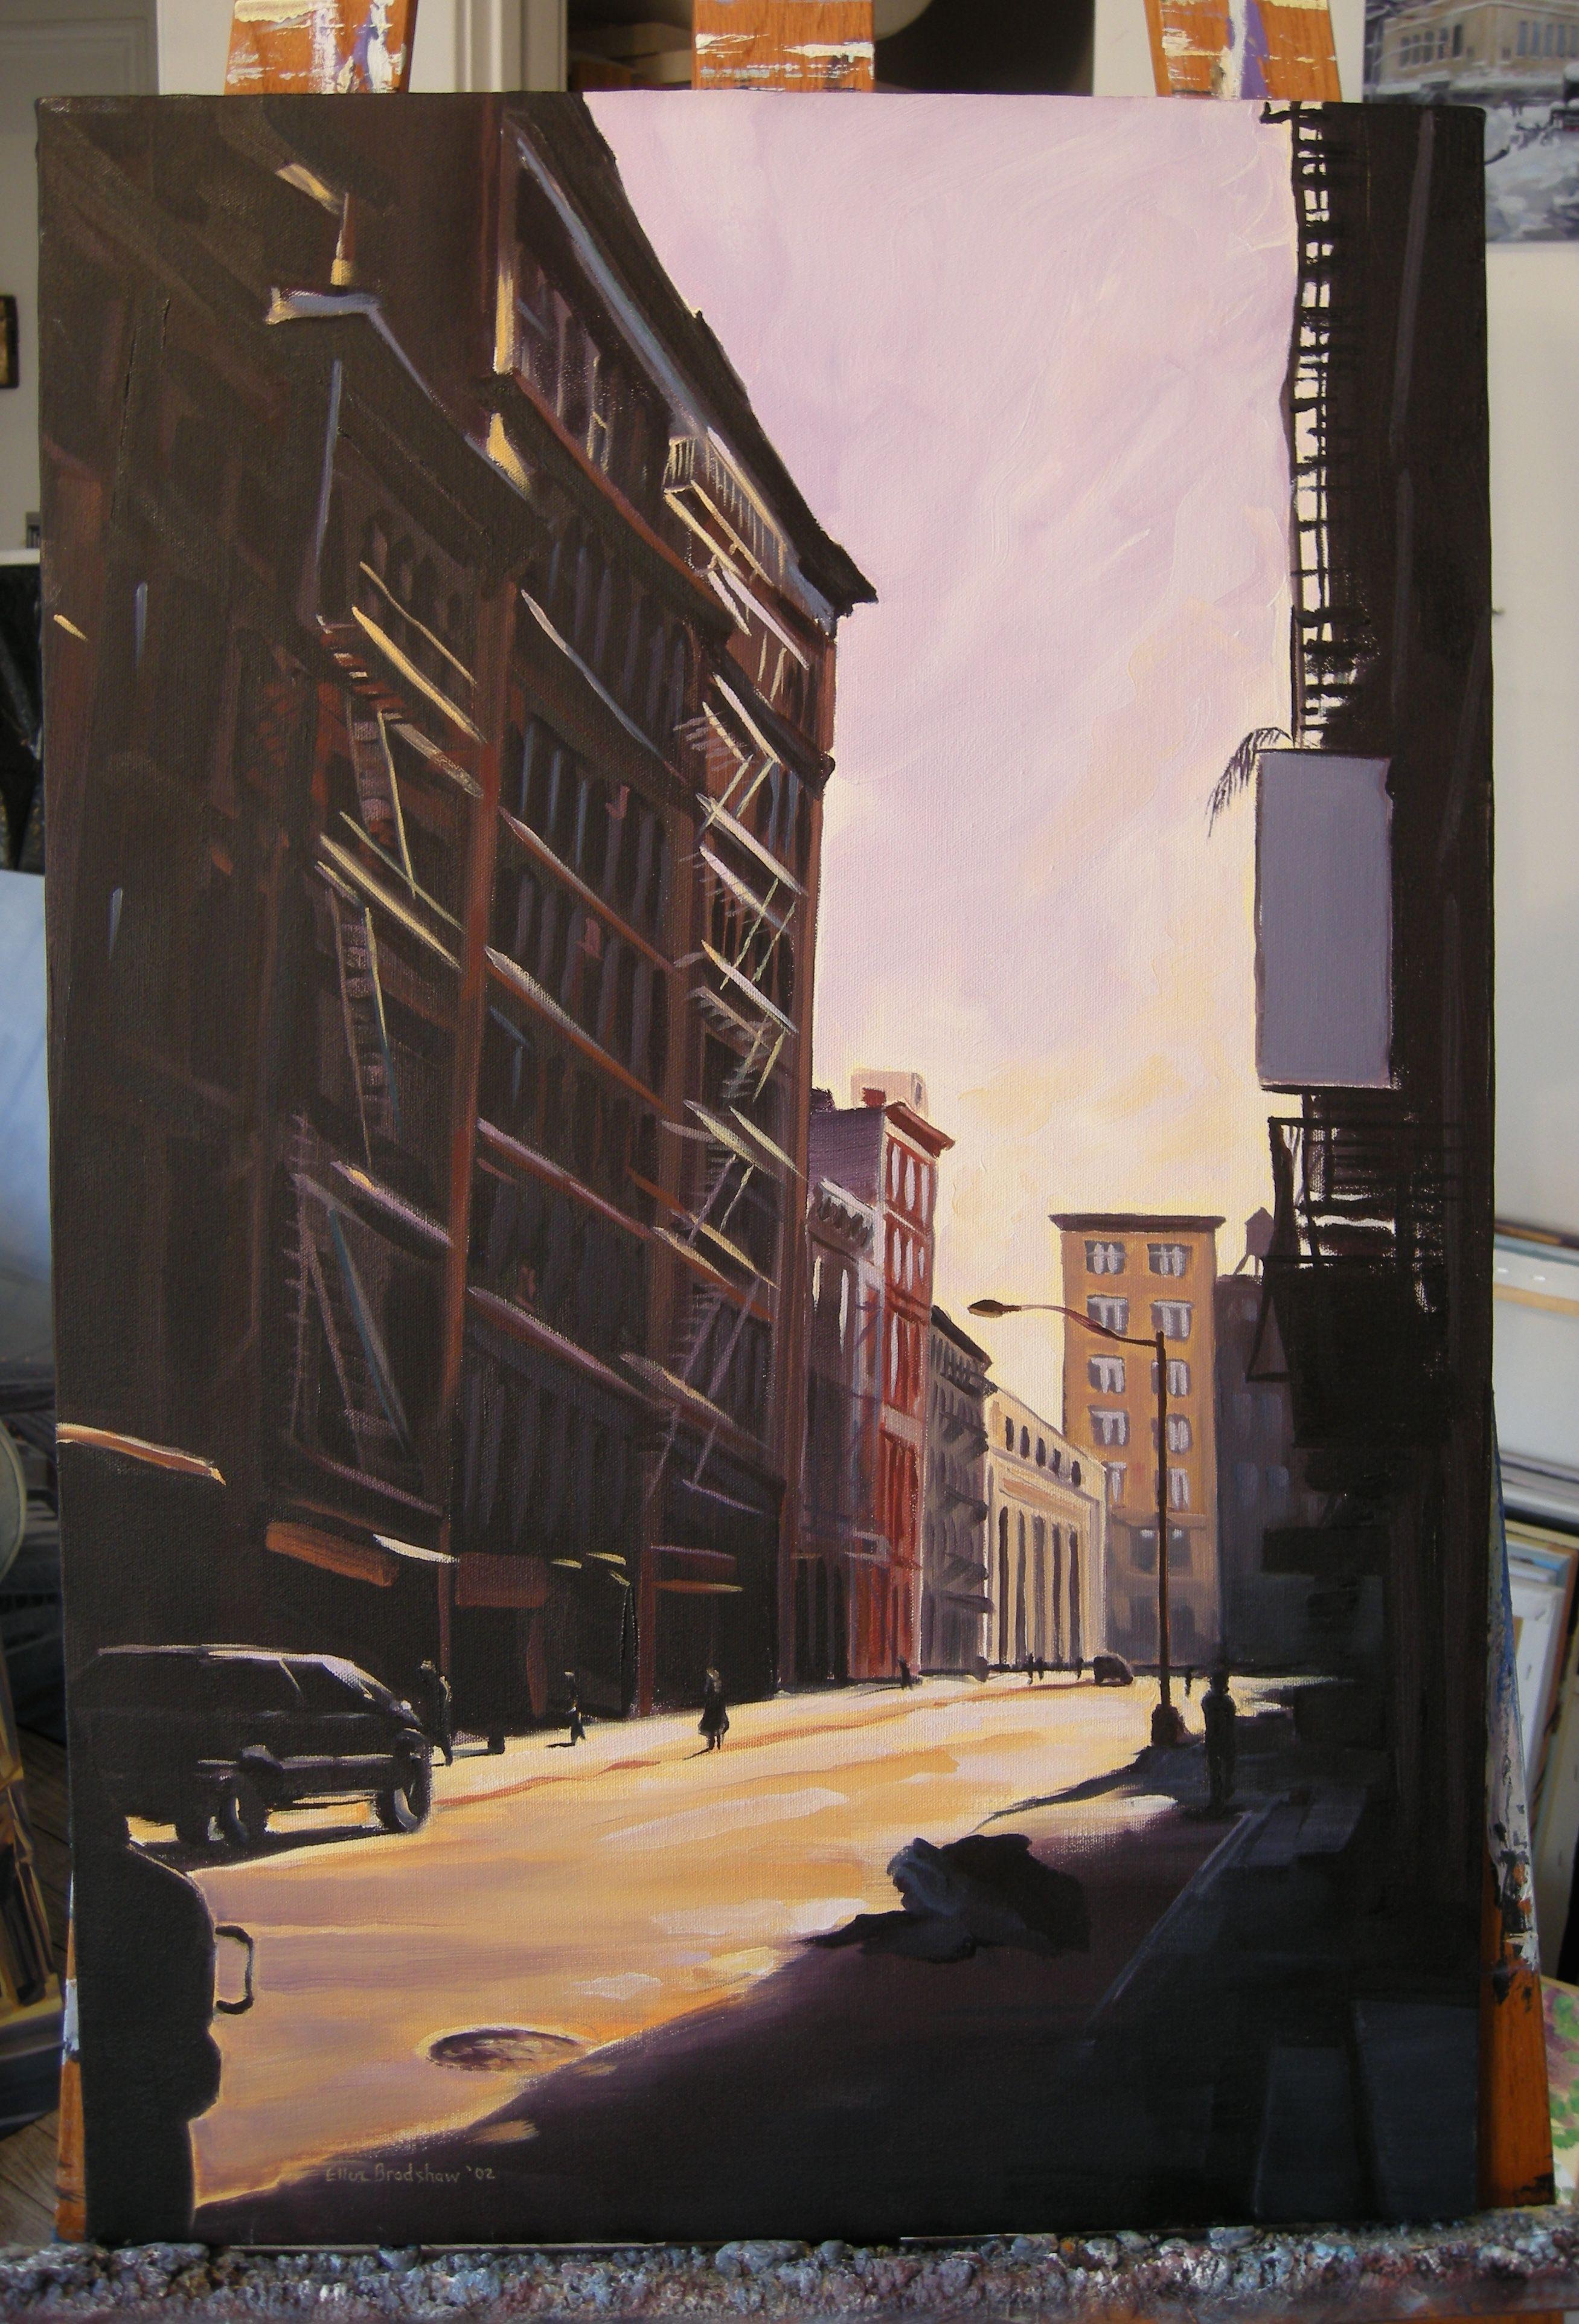 Walking to Pearl Paint on Lispenard St in Lower Manhattan one bright sunny morning, I was struck by the dramatic contrast of sun and shadow! The play of sunlight on fire escapes, and the lone figures and cars bathed in deep shadow inspired me to